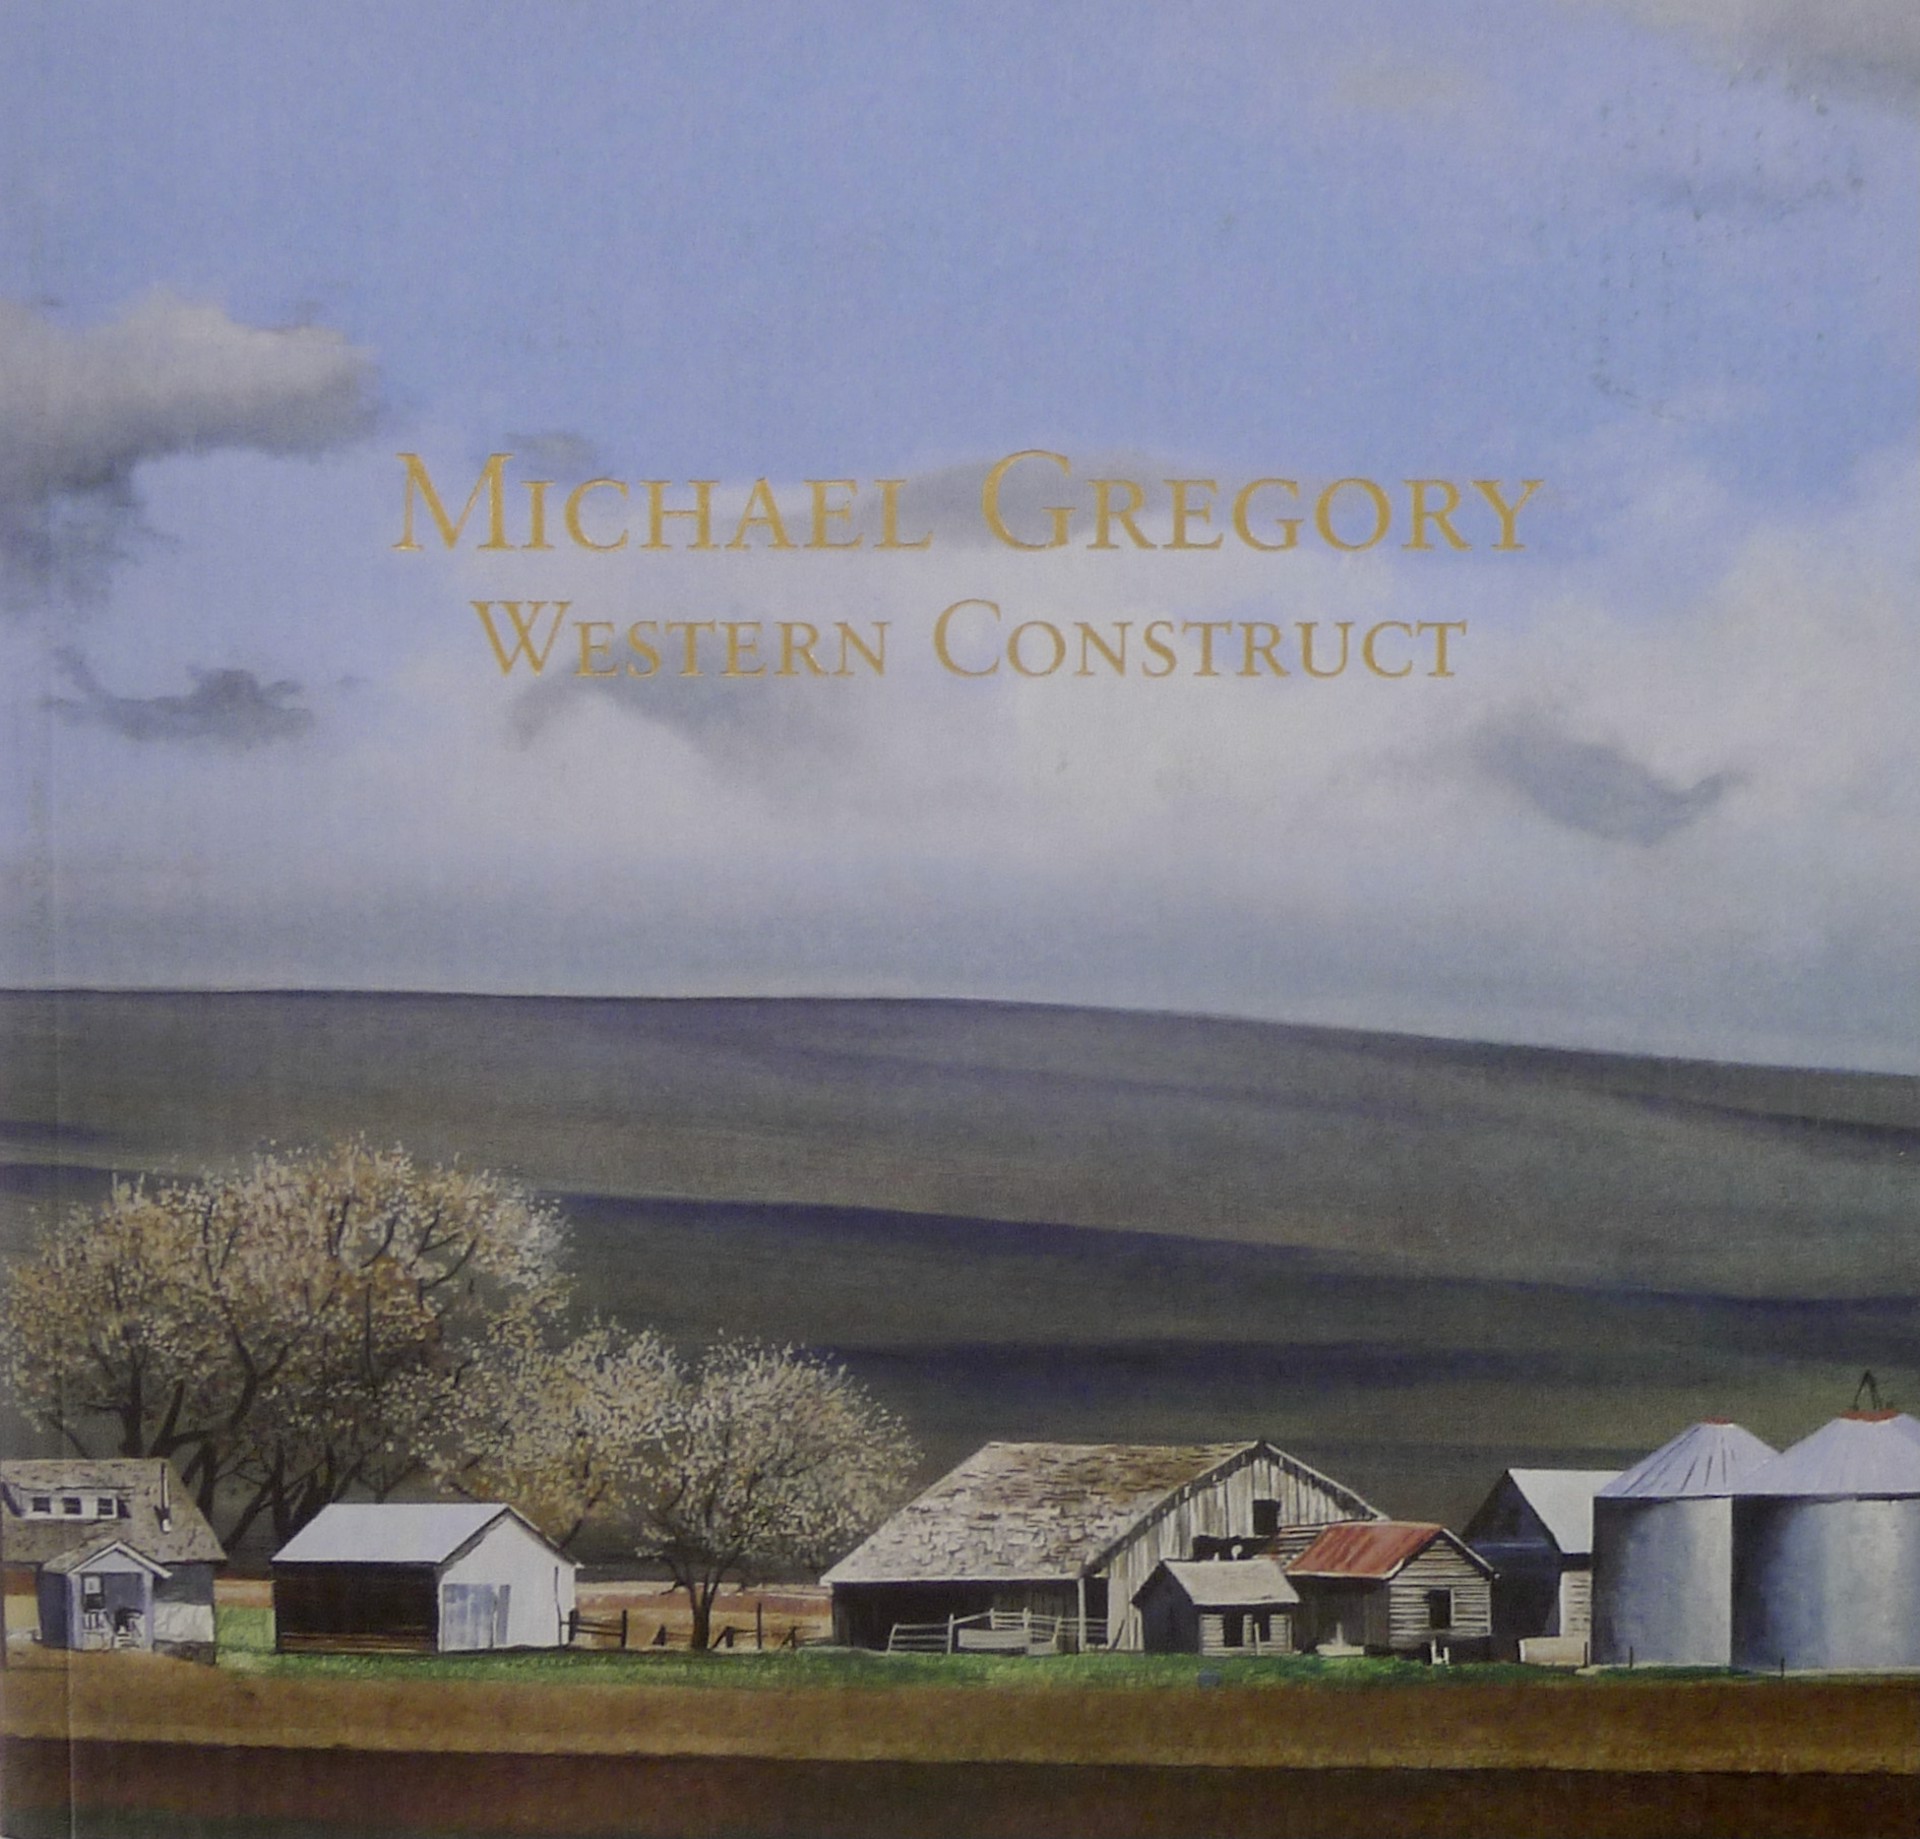 Western Construct by Michael Gregory